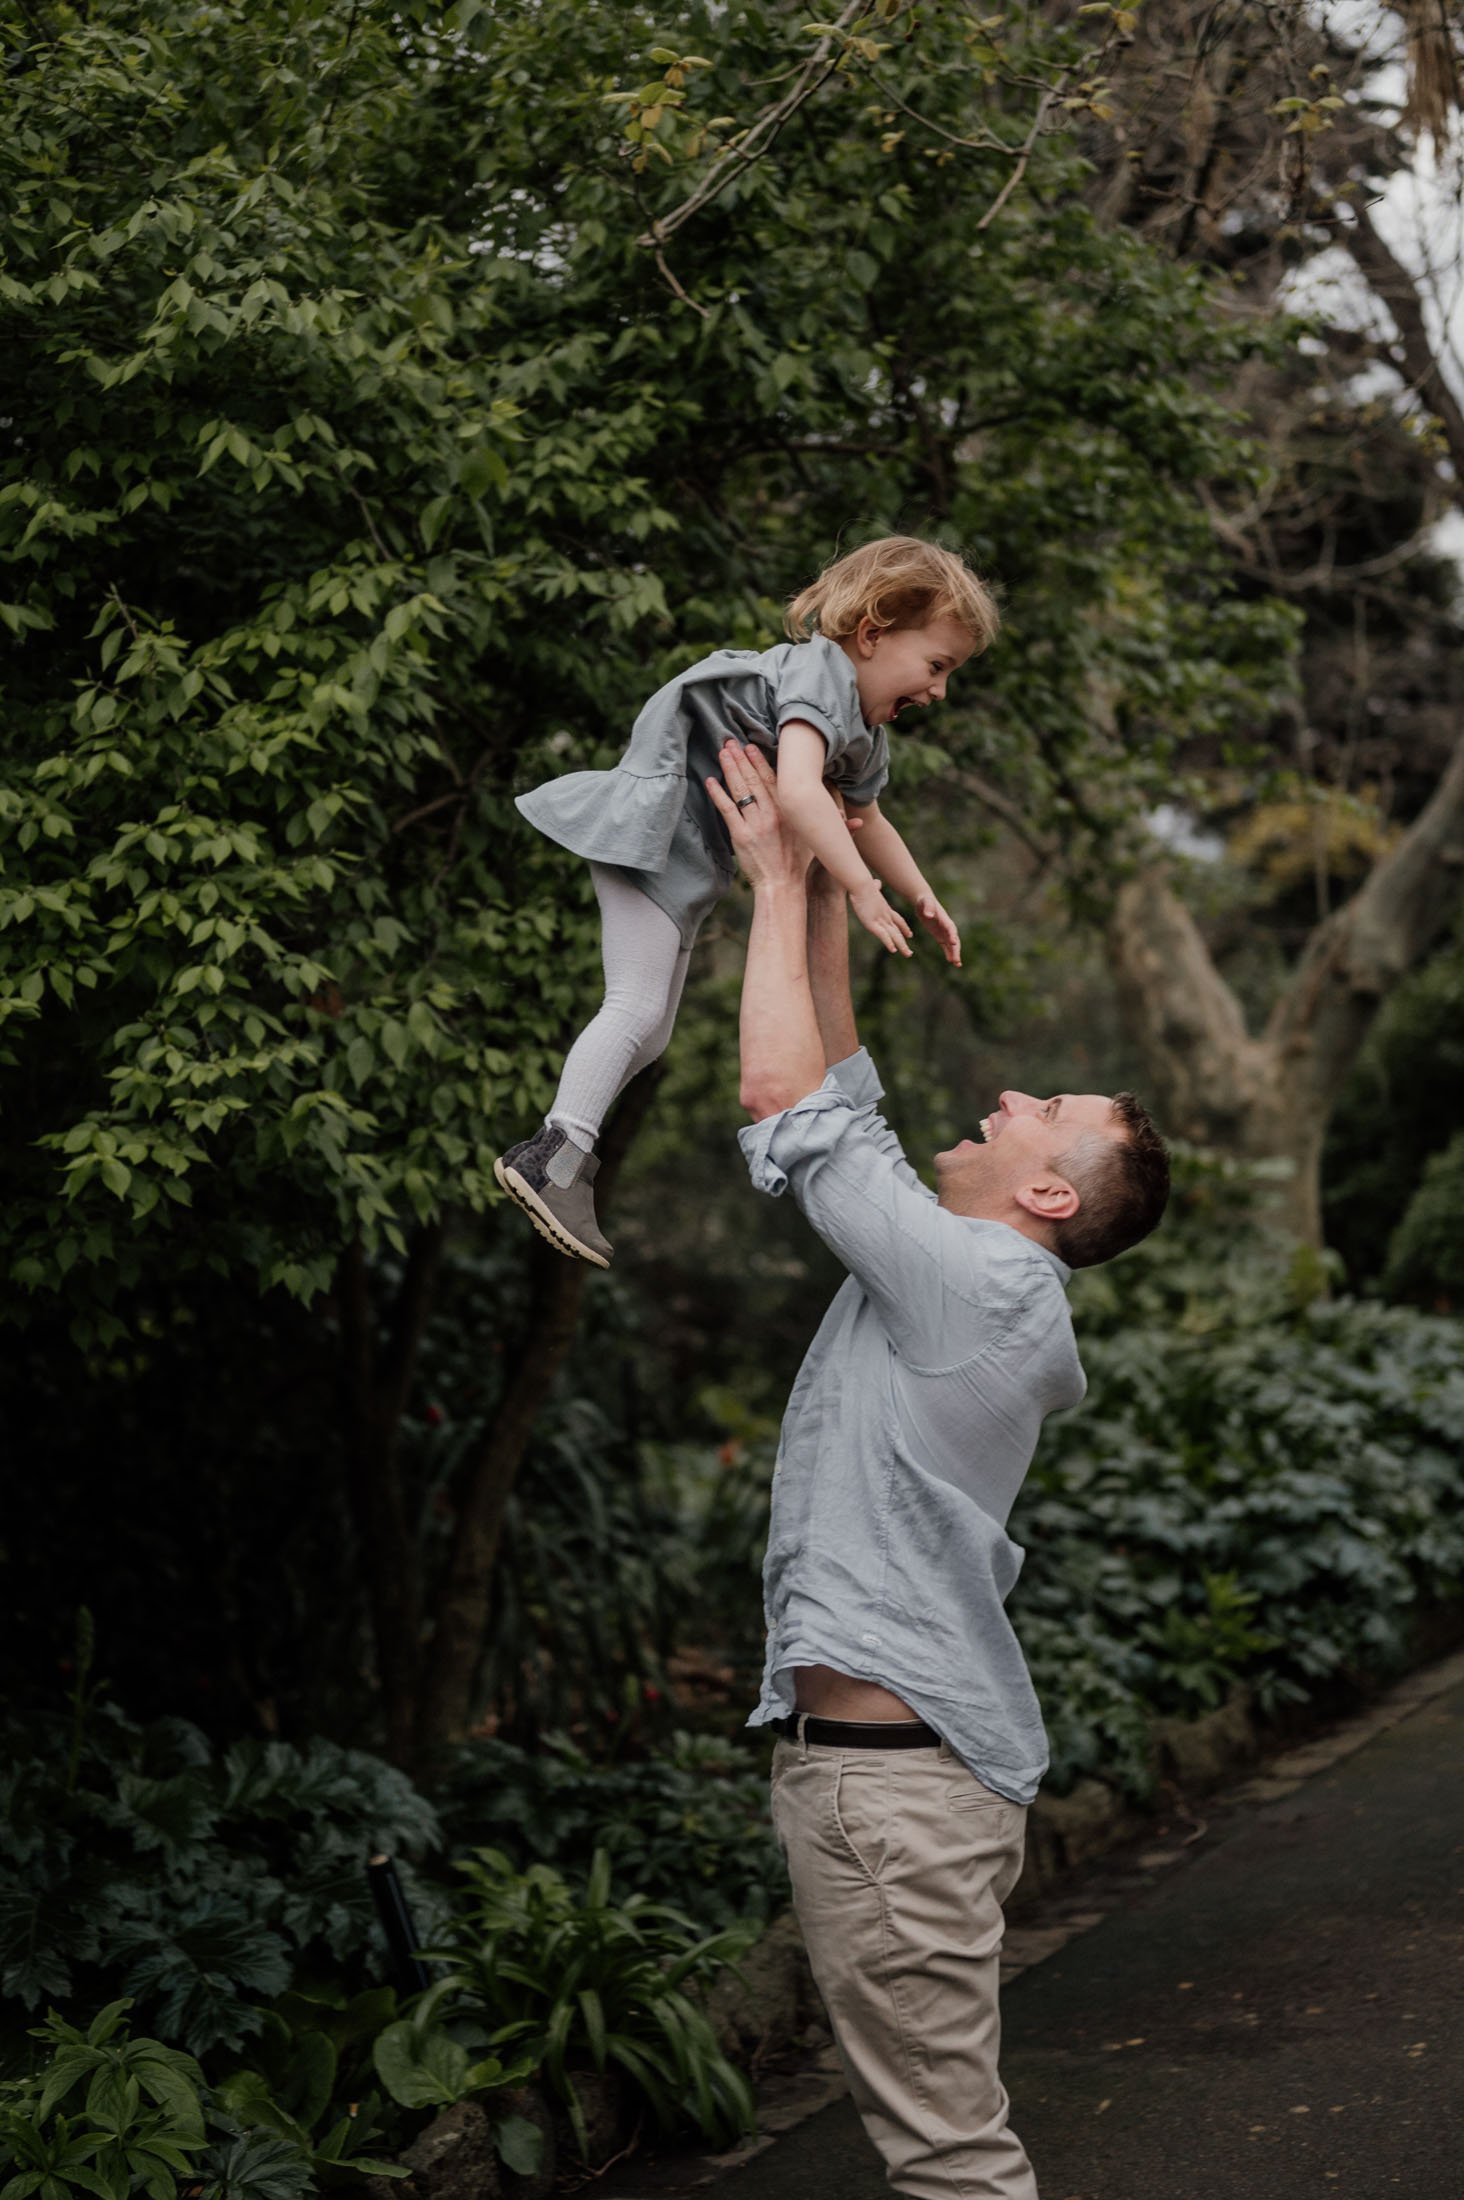 father throwing daughter in air